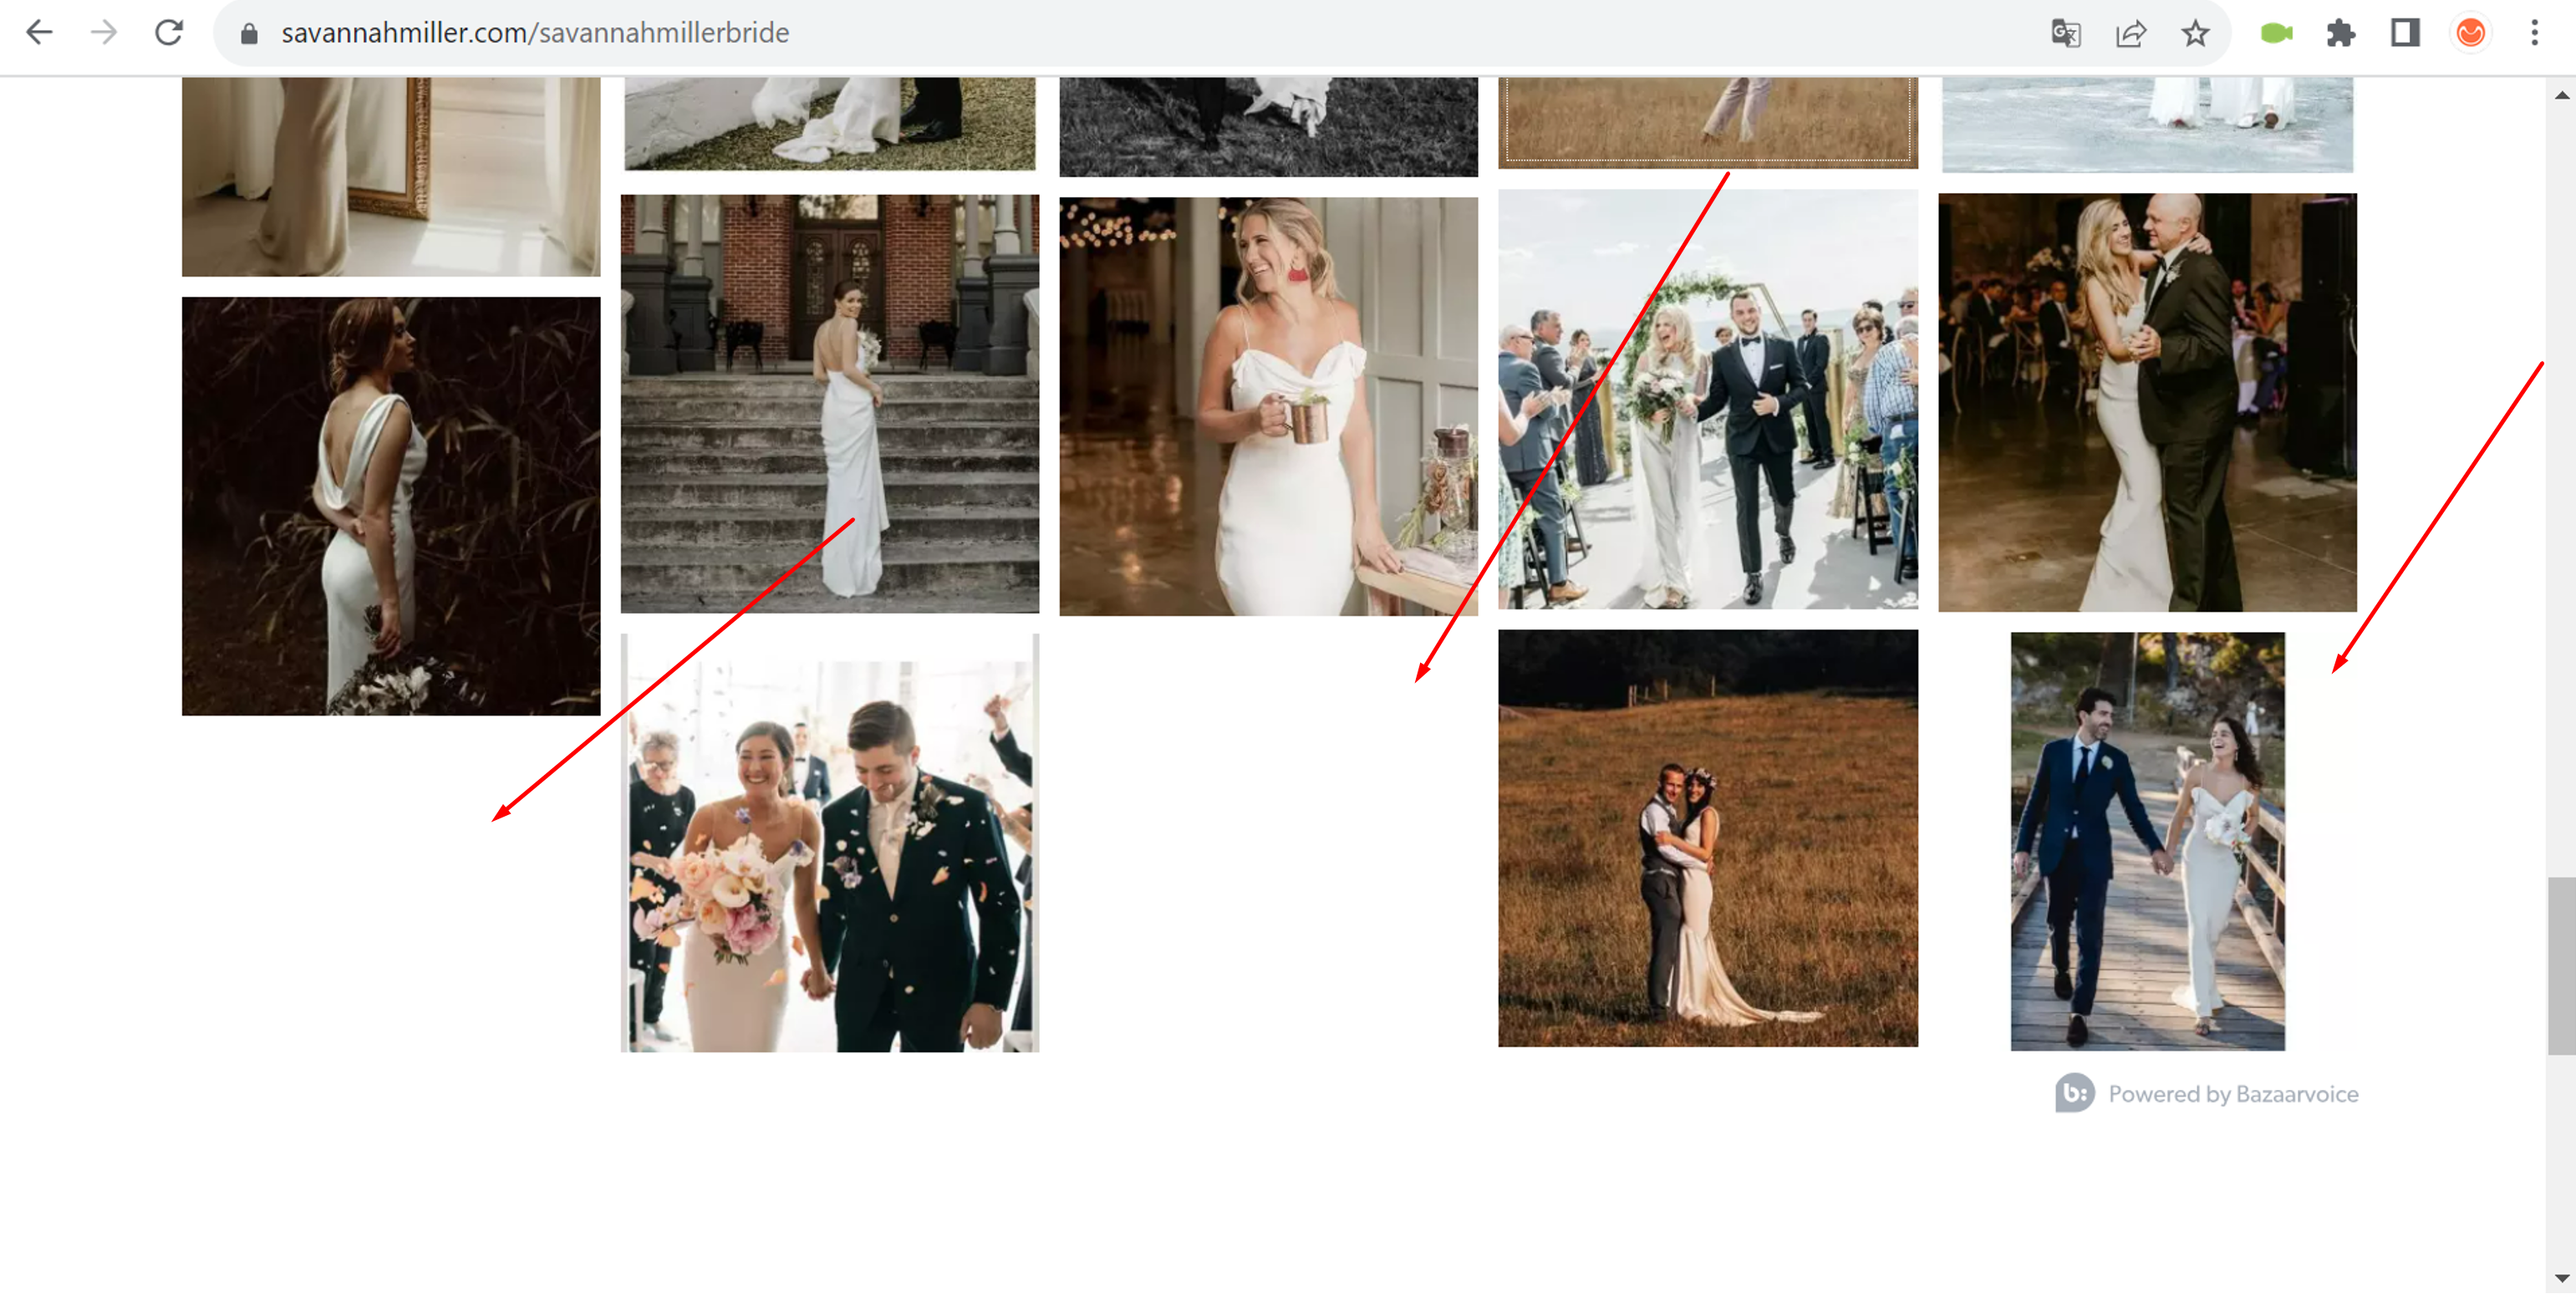 At bottom of #SAVANNAHMILLERBRIDE page, photo grid has shifted